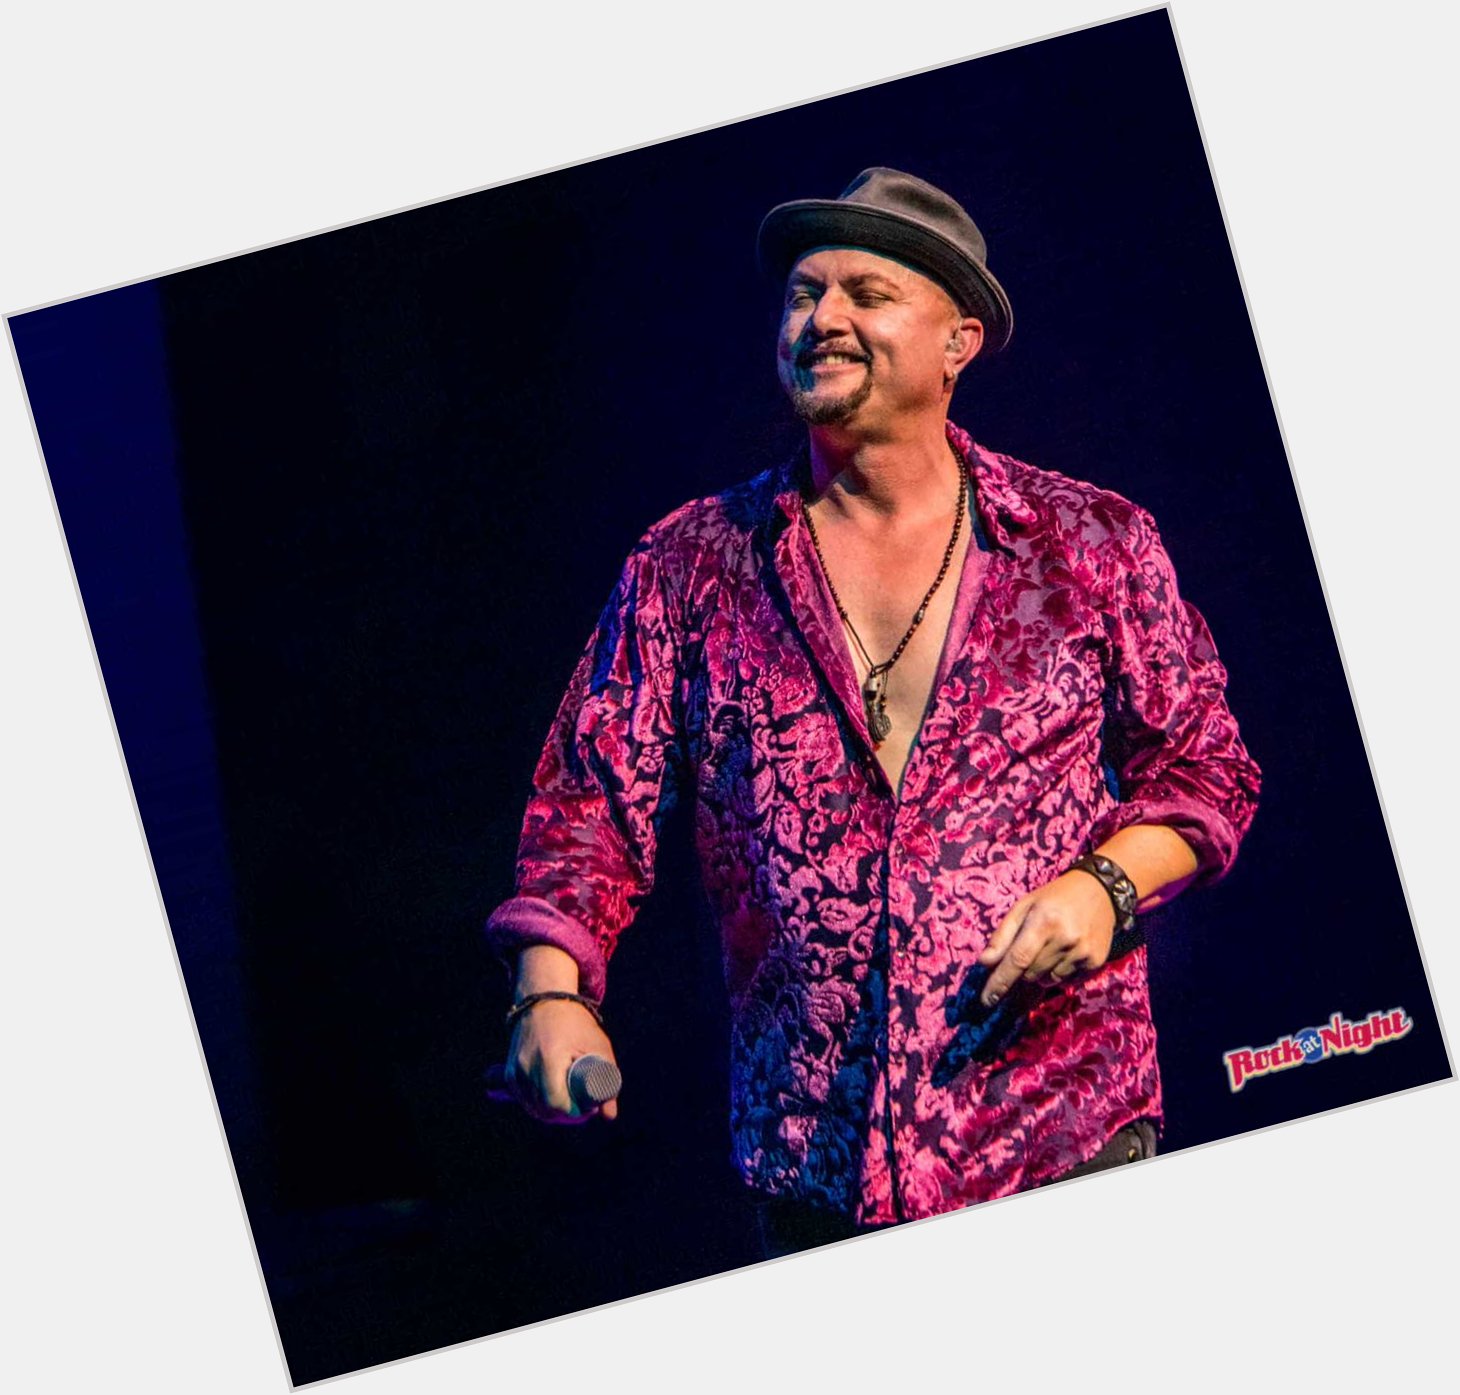 Wishing Geoff Tate a very happy birthday today! Chyrisse Tabone from Rock at Night Magazine 2020 